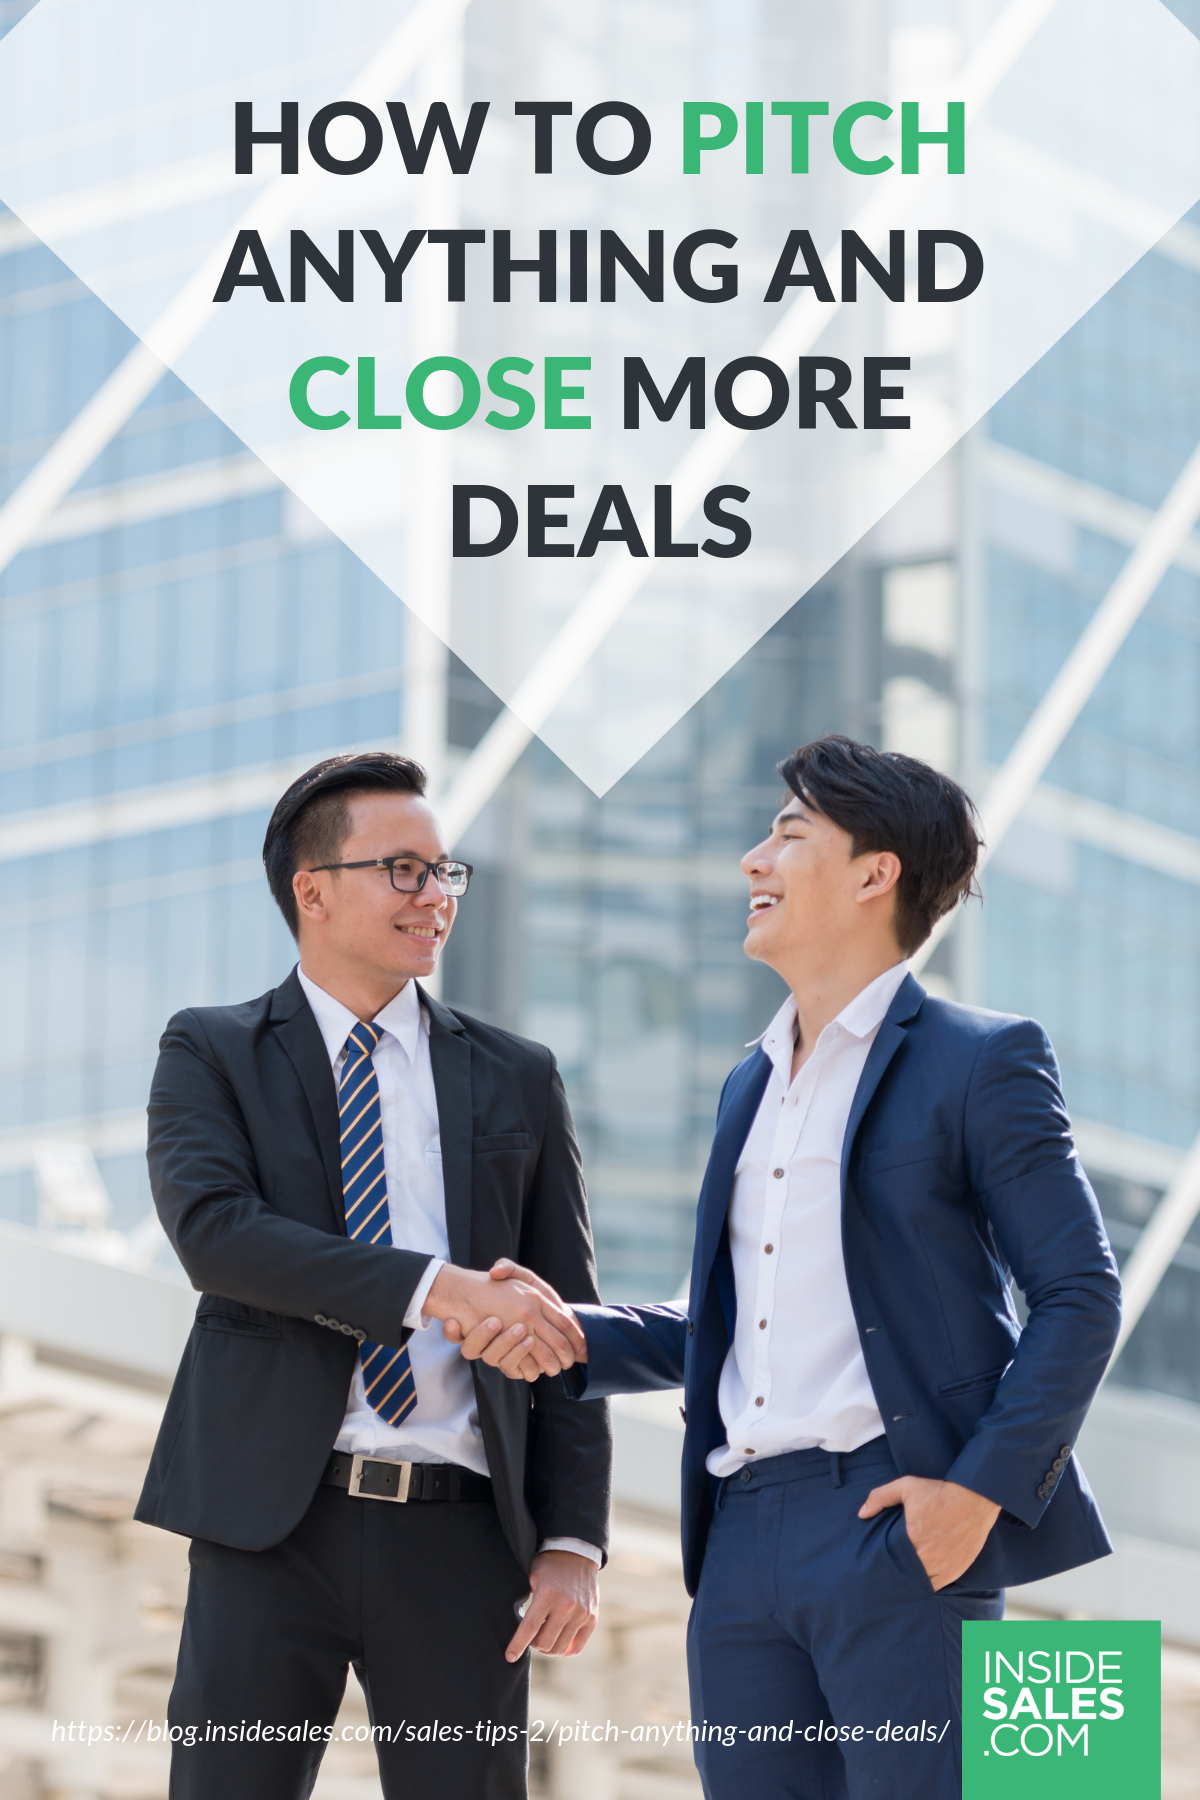 How To Pitch Anything And Close More Deals https://resources.insidesales.com/blog/sales-tips-2/pitch-anything-and-close-deals/